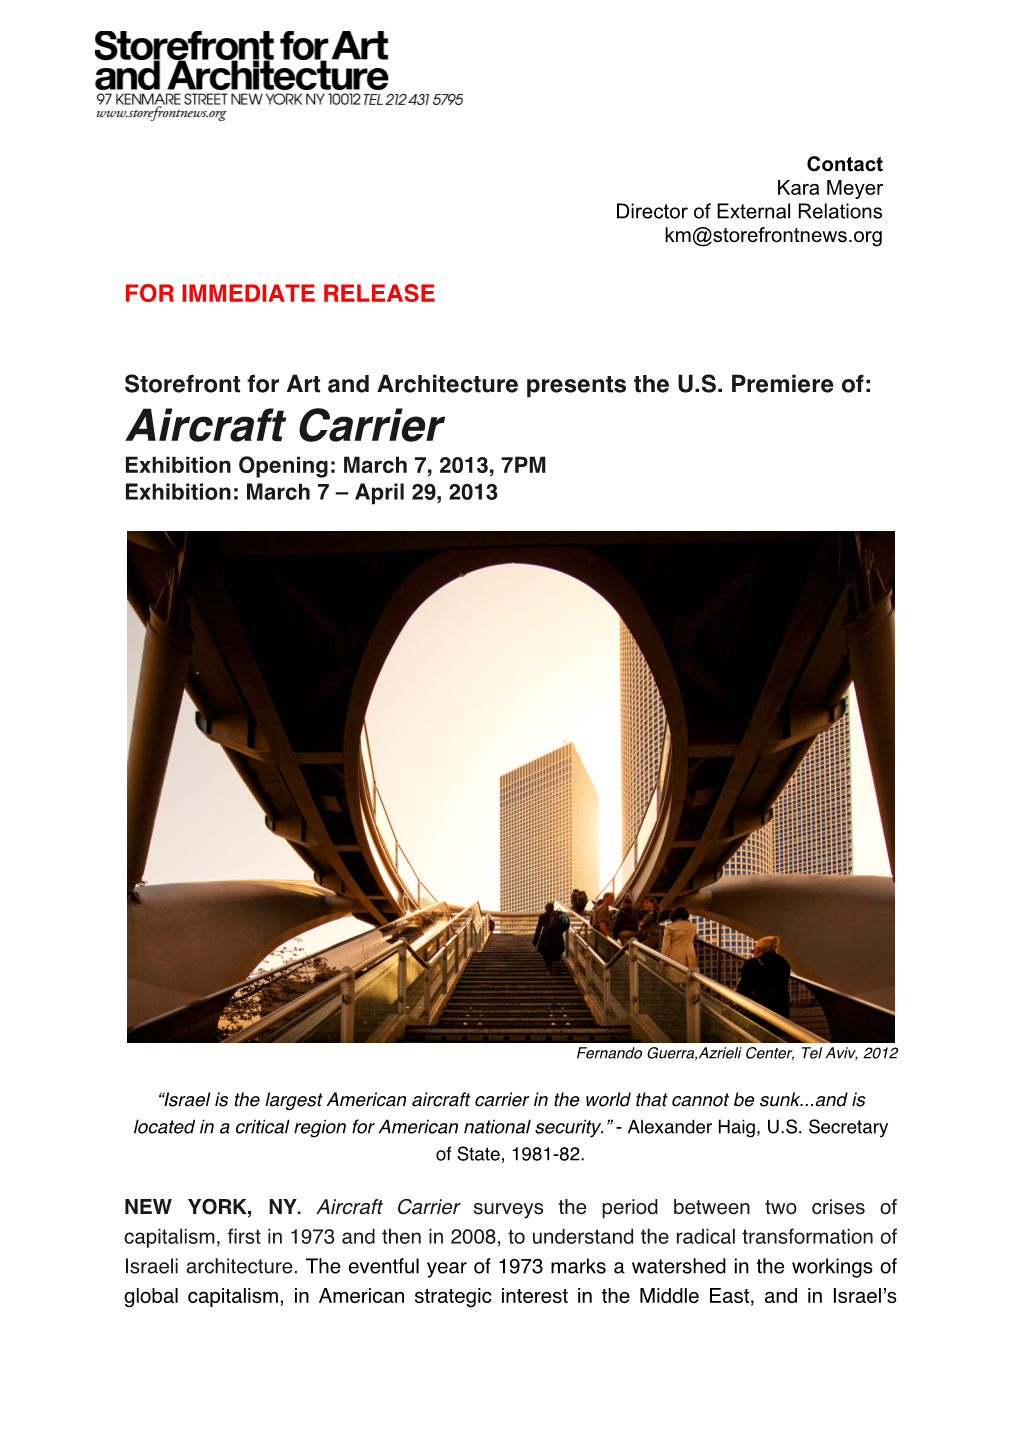 Aircraft Carrier Exhibition Opening: March 7, 2013, 7PM Exhibition: March 7 – April 29, 2013